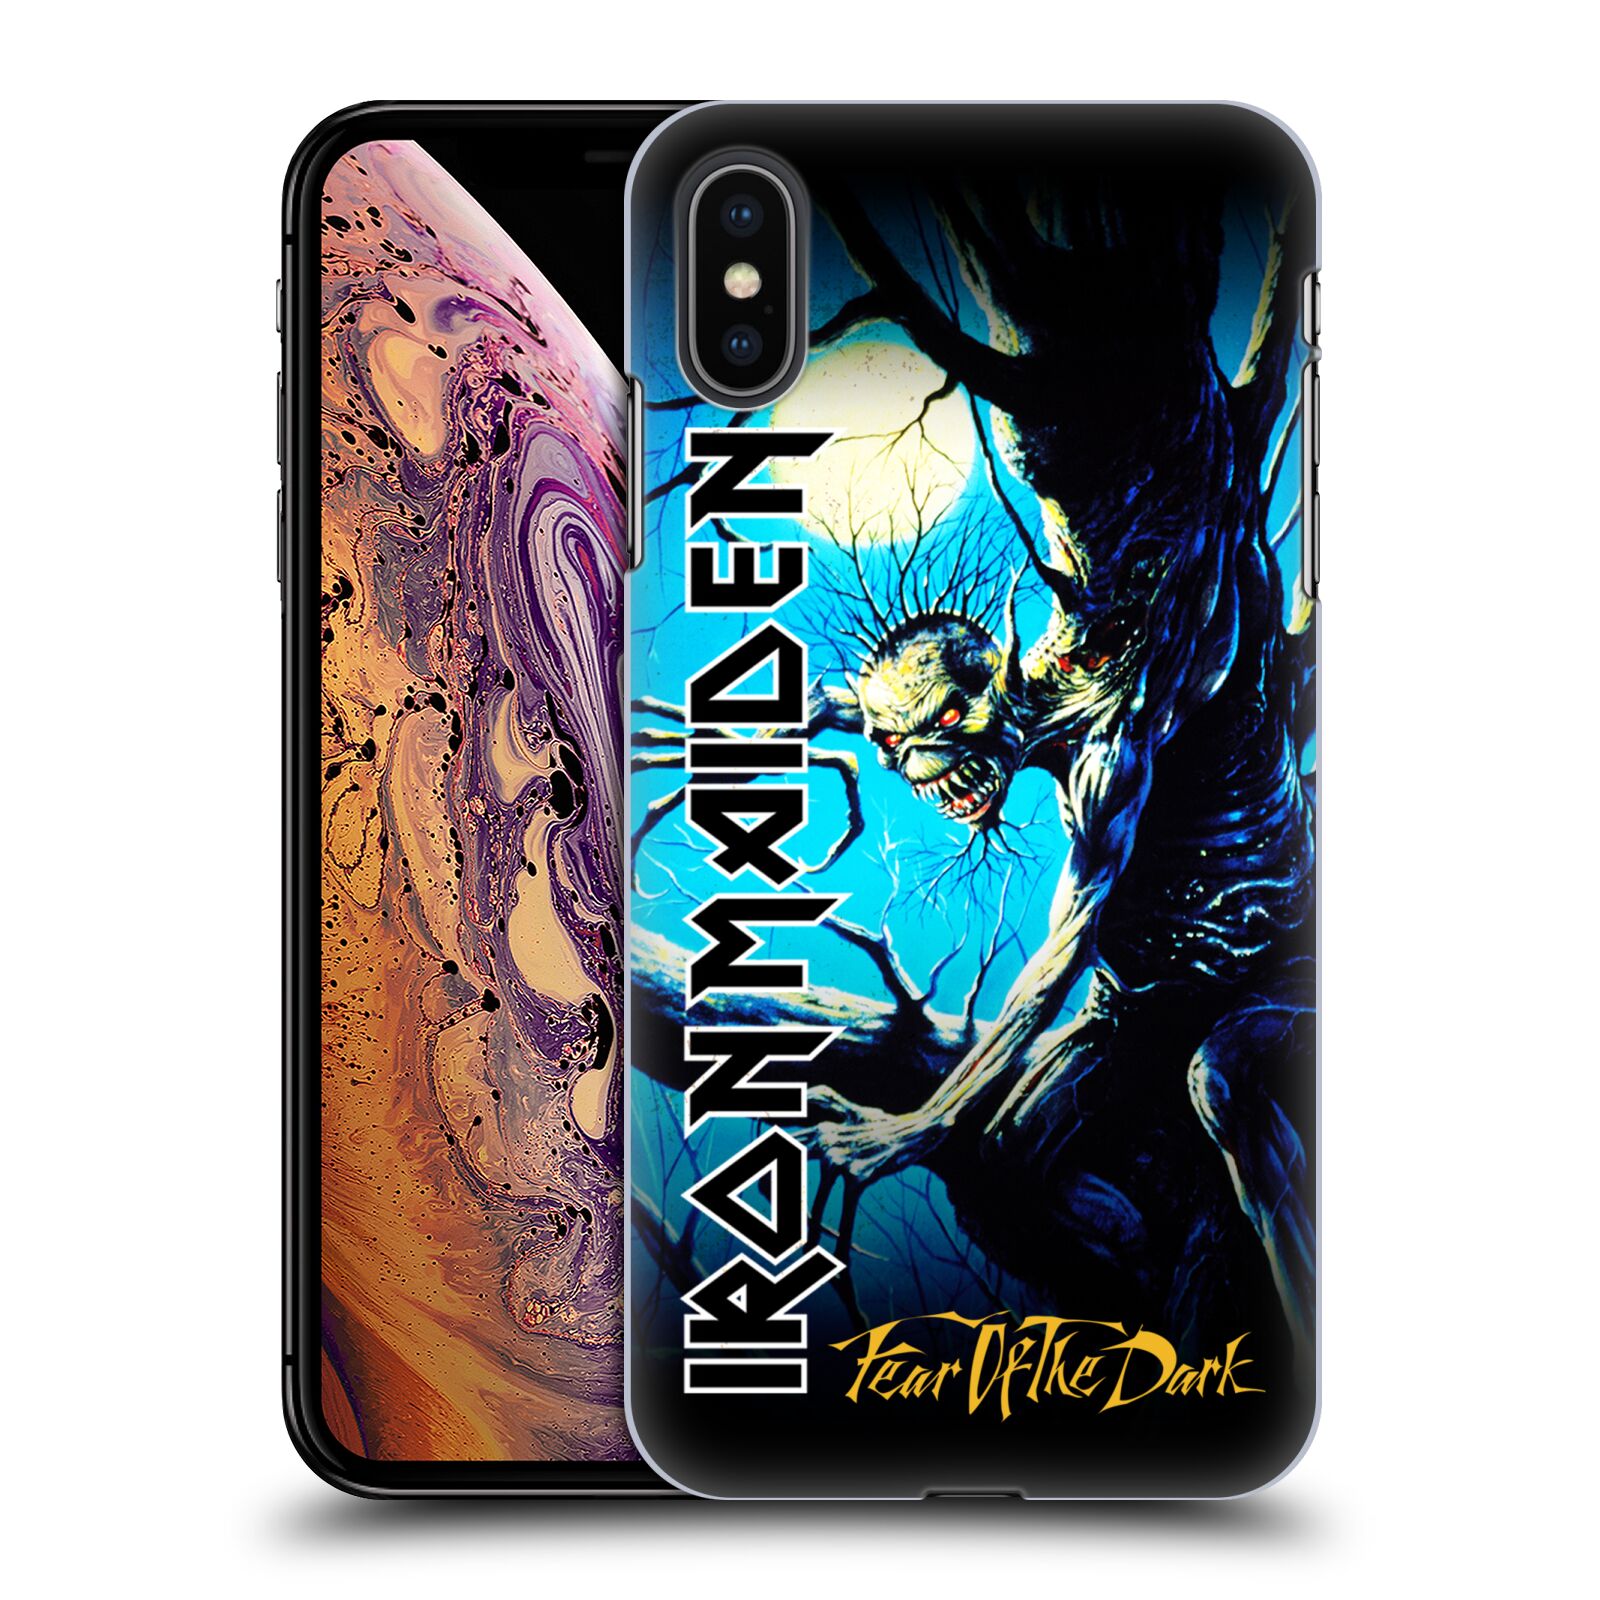 Zadní obal pro mobil Apple Iphone XS MAX - HEAD CASE - Iron Maiden - Fear Of The Dark